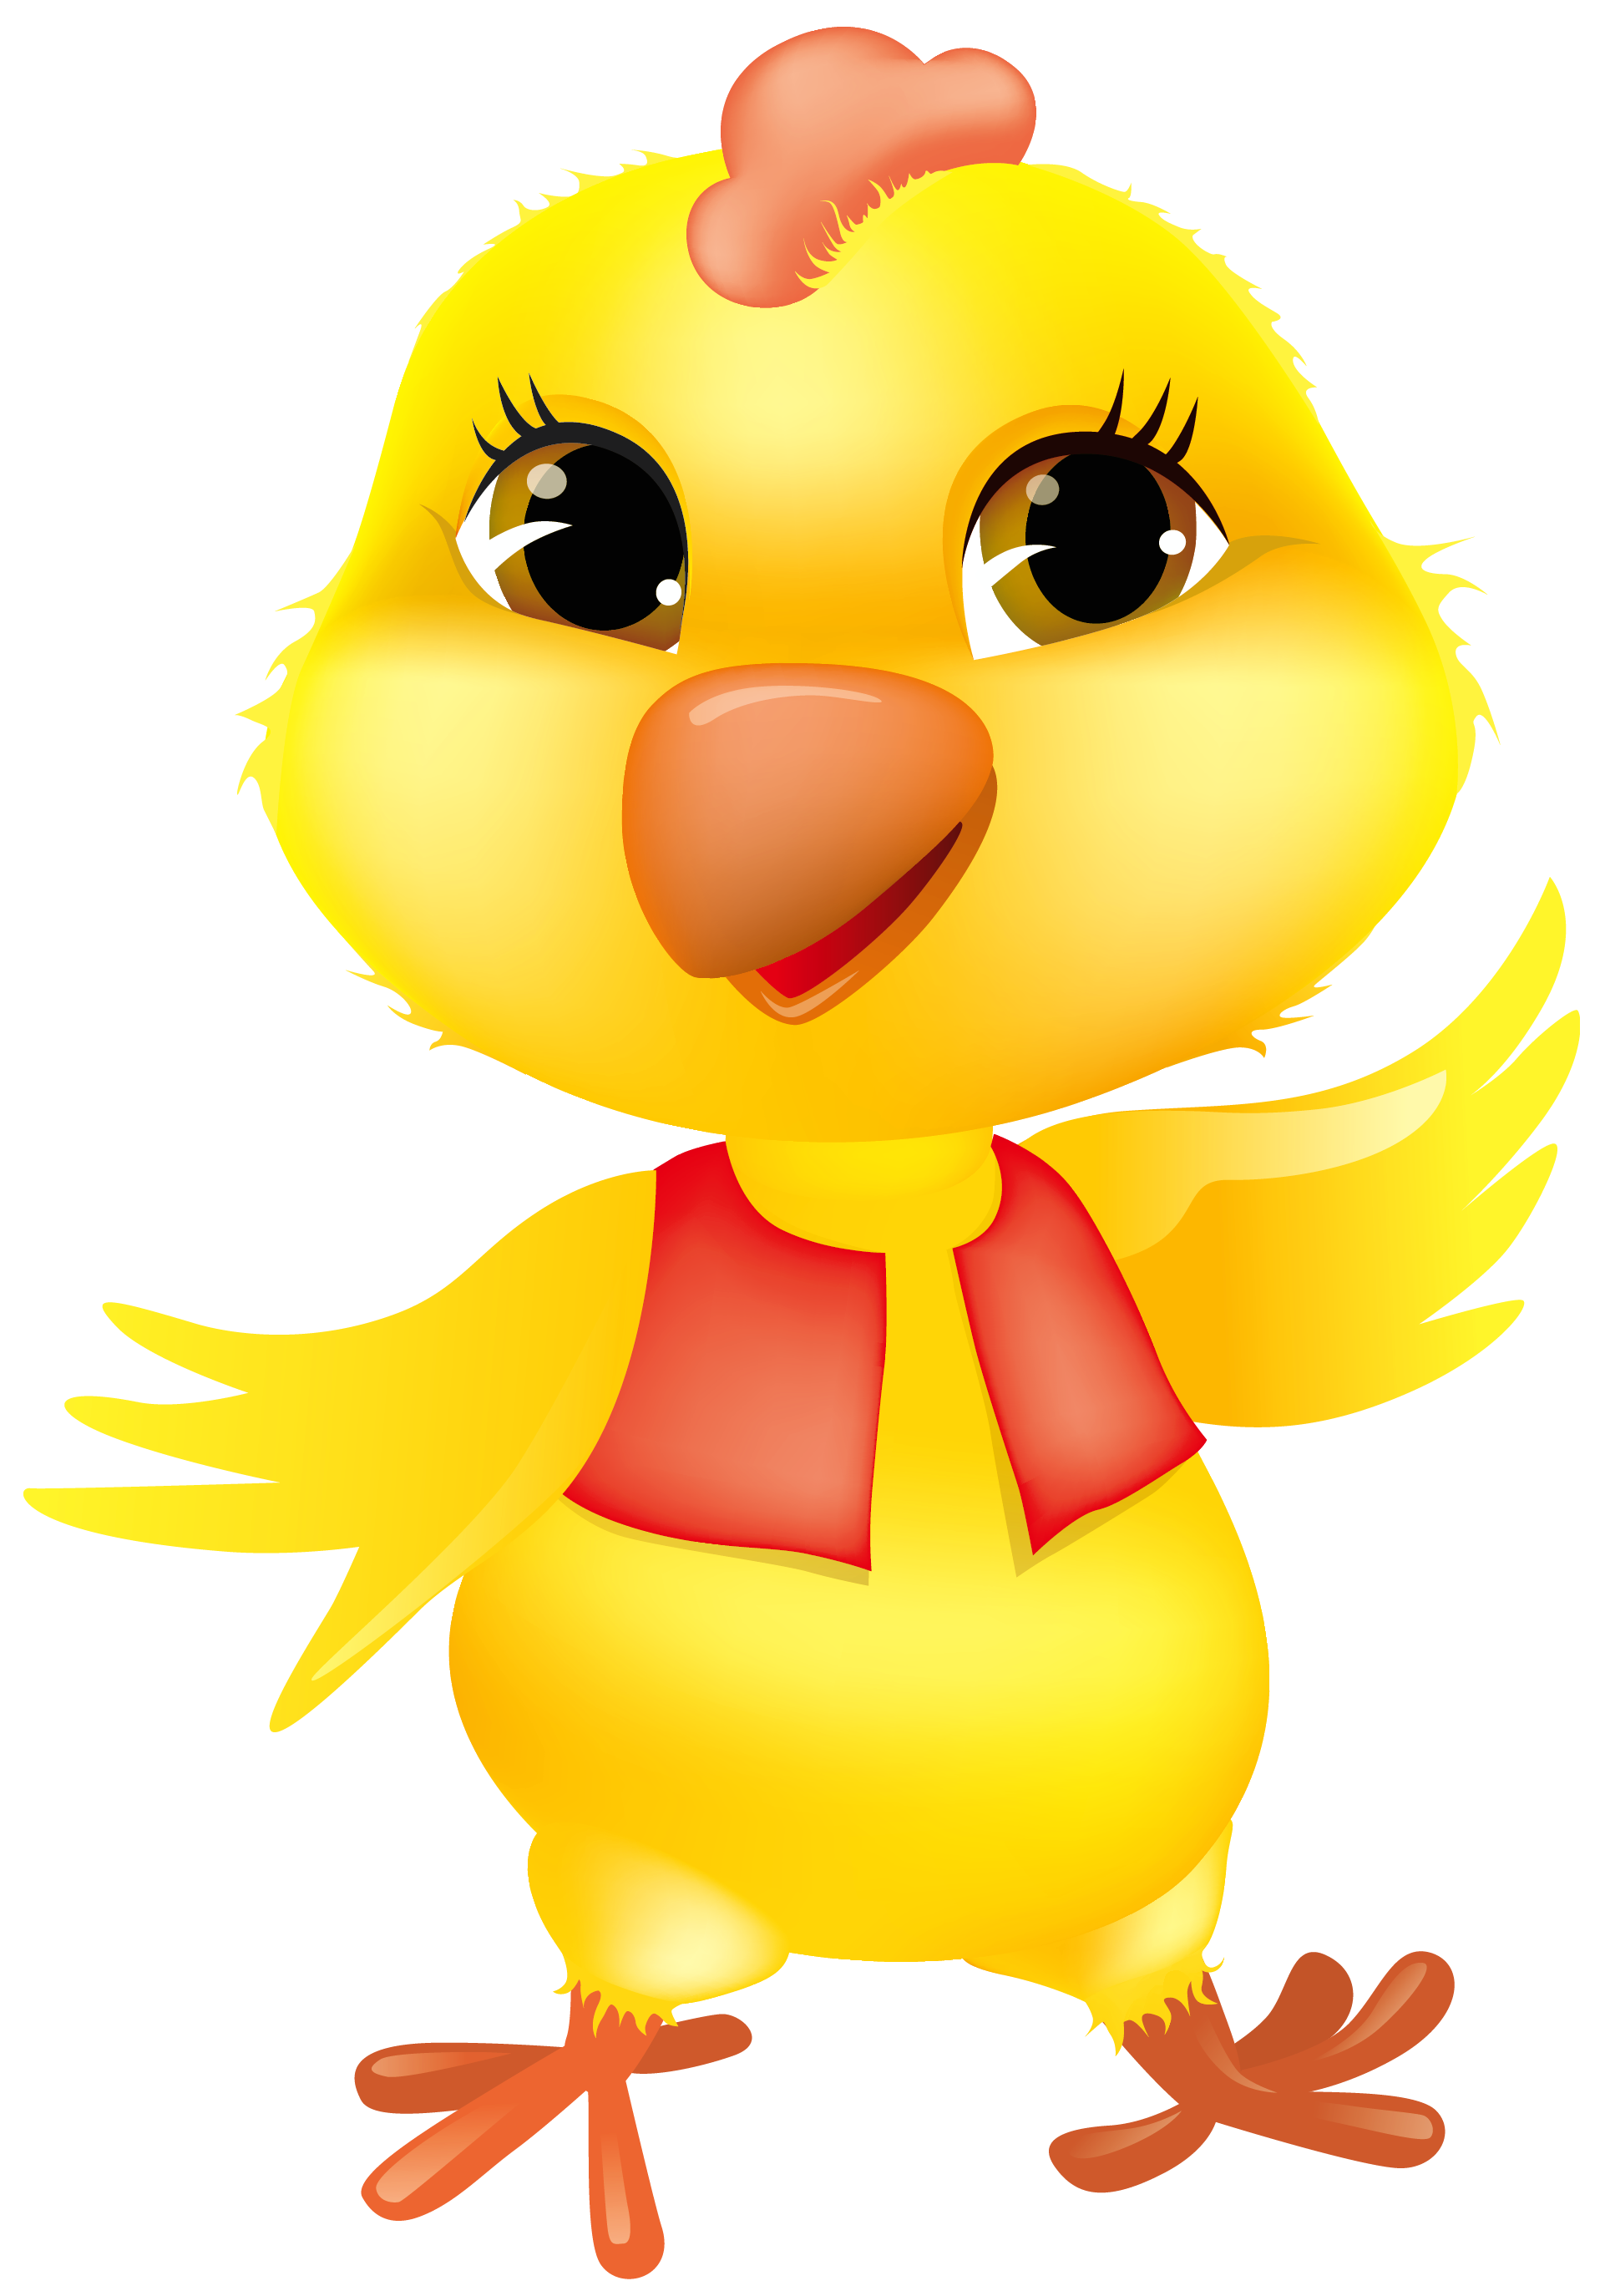 Chicken Egg Chick Brown Image 2 Clipart